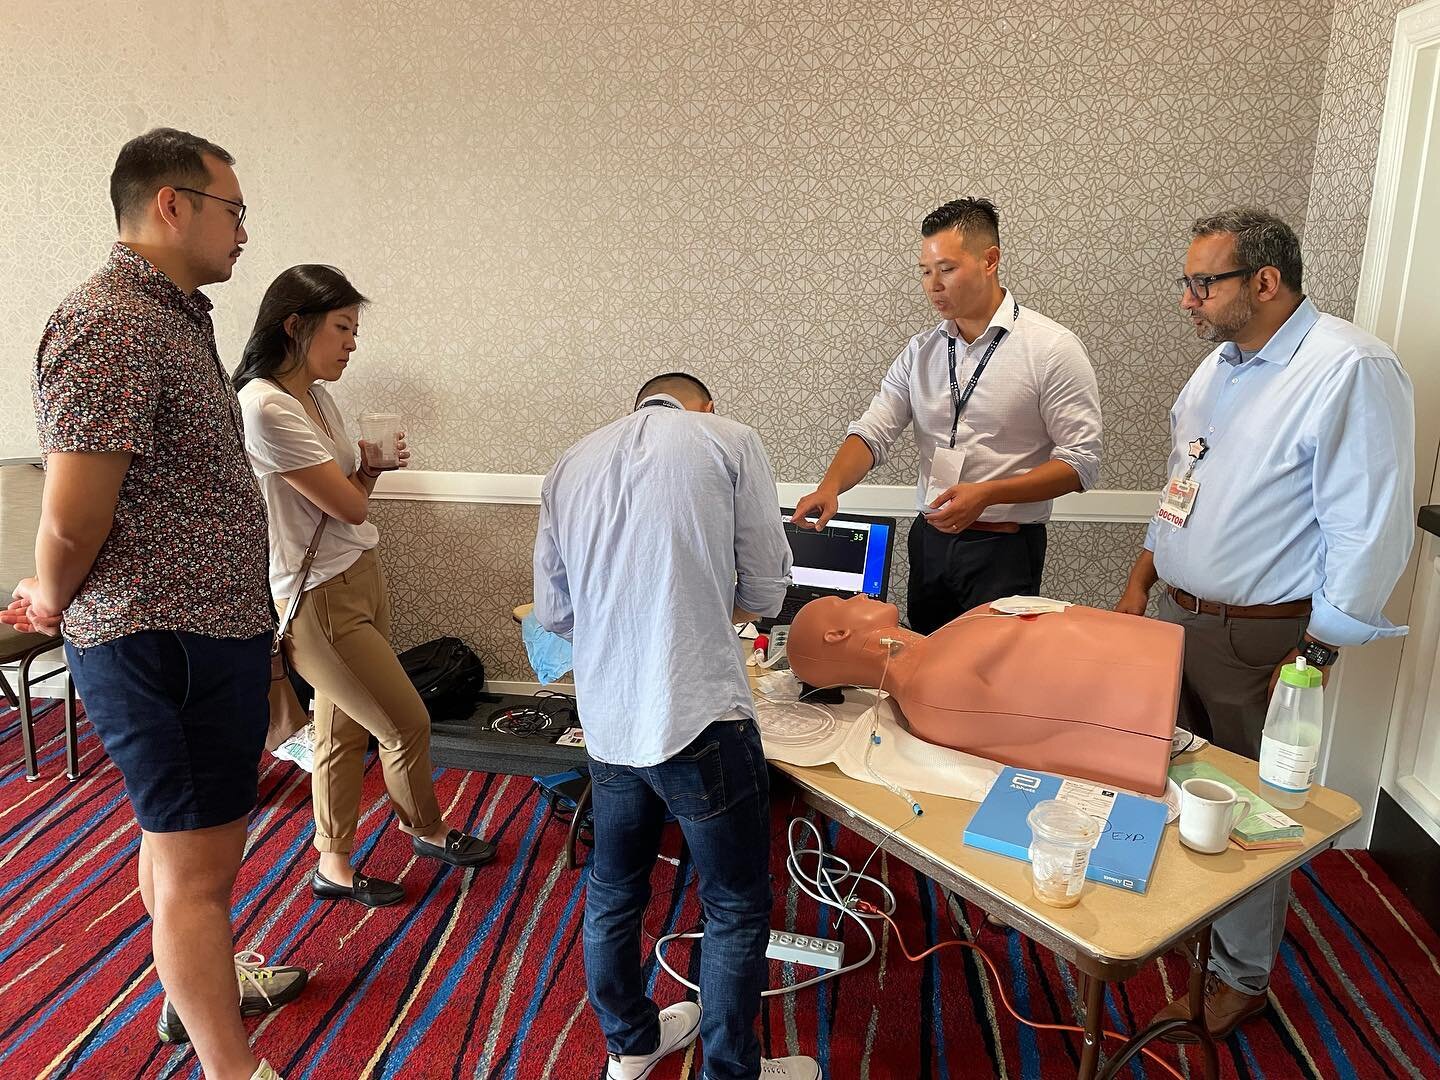 Our Simulation and Ultrasound faculty hosting awesome small groups at Envision&rsquo;s East Advanced EM and Hospital Medicine Conference in Atlantic City this week! We practiced TVPs, chest tubes, crics, fascia iliaca and PENG blocks, and even did a 